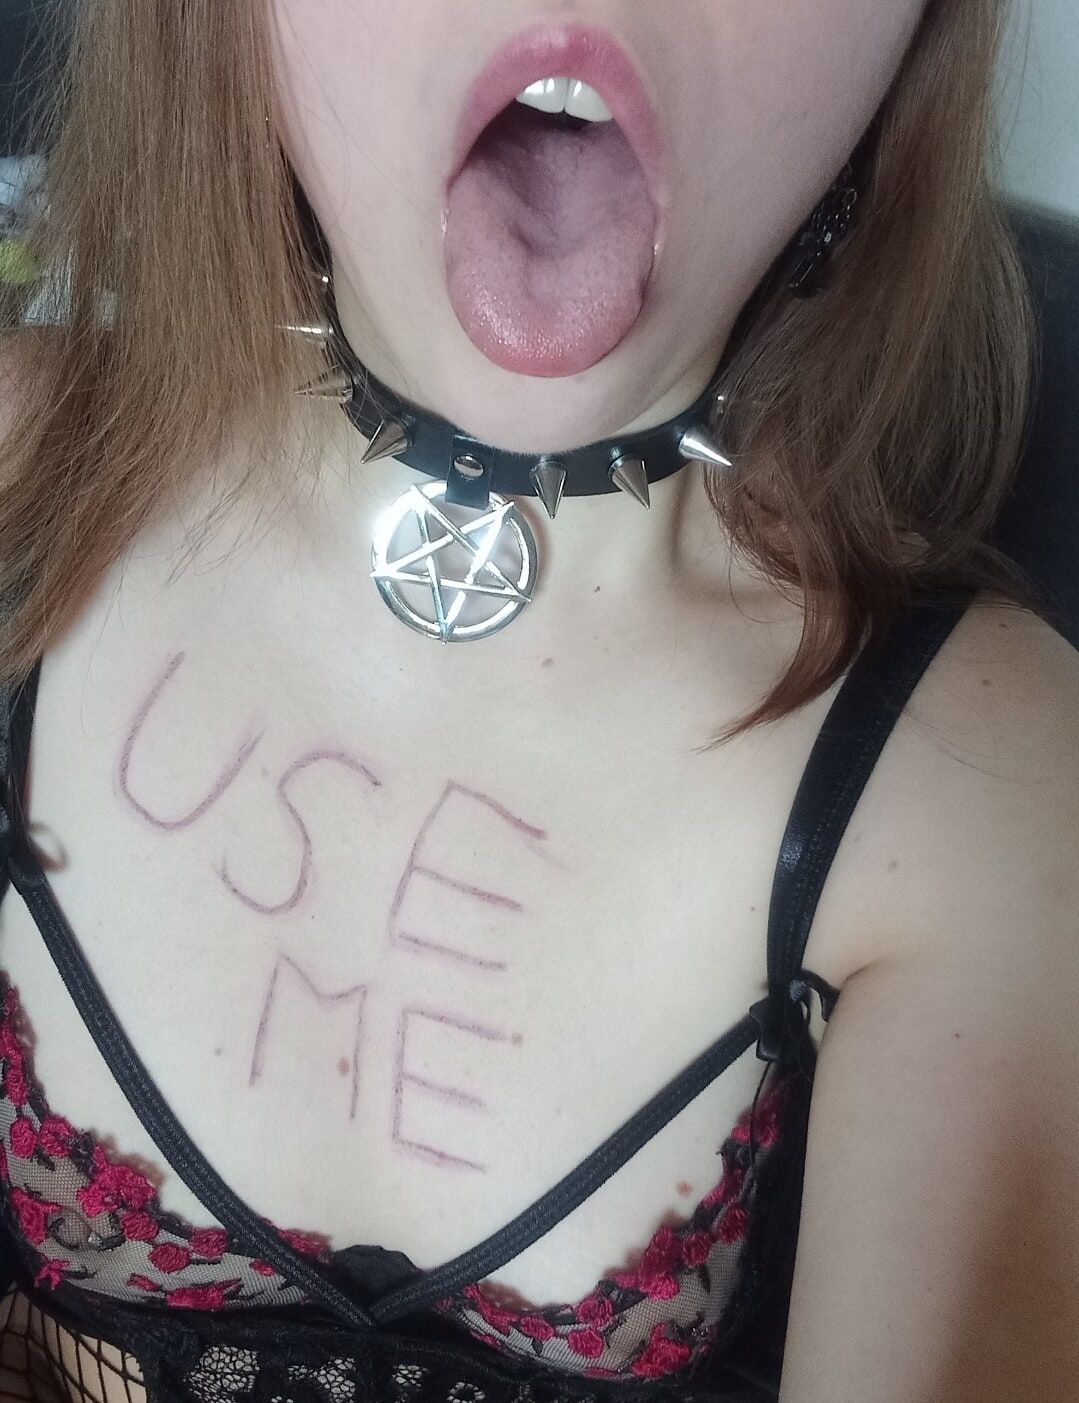 Teen goth slut shows of her body, asking to be used #4